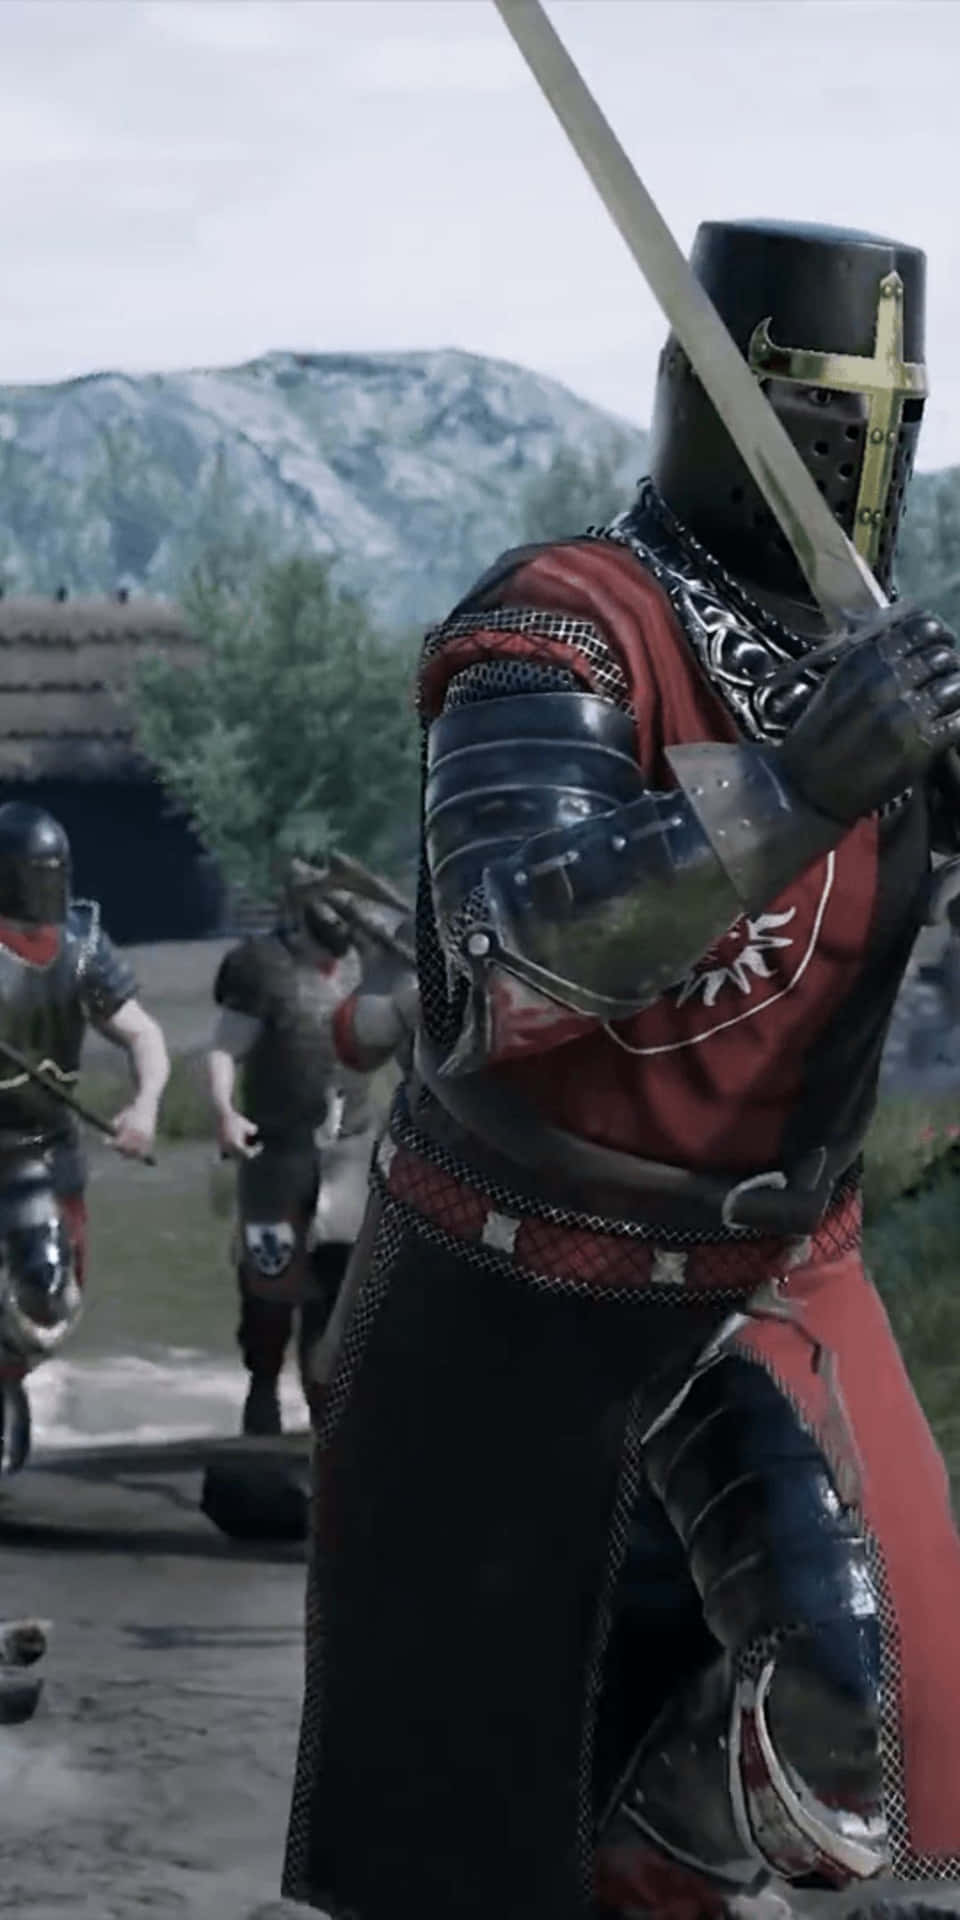 Put Your Best Foot Forward With Pixel 3's Mordhau Video Game